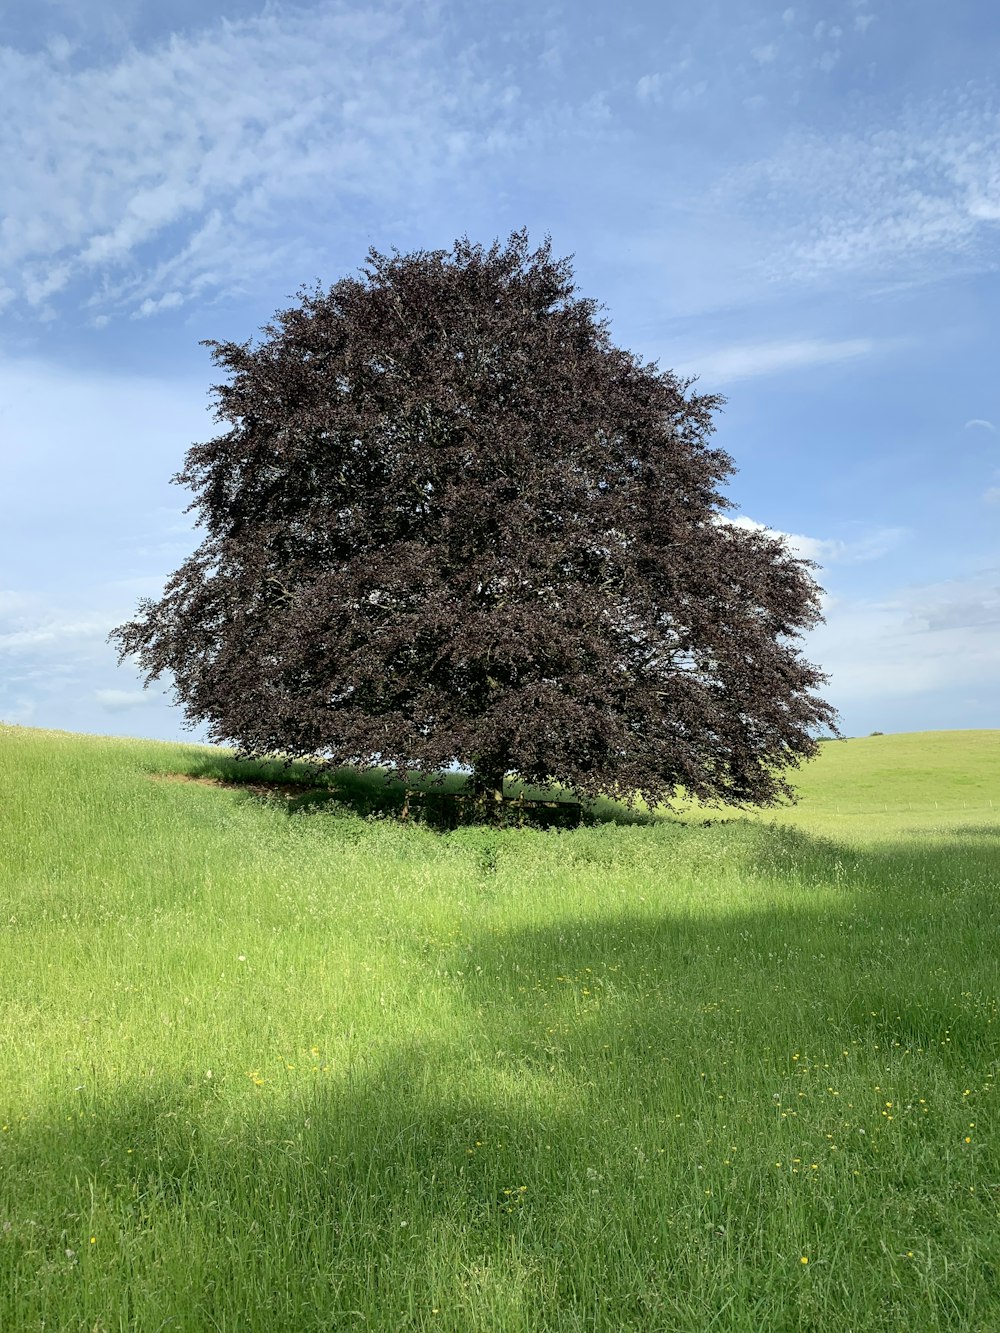 brown tree on green grass field under blue sky during daytime